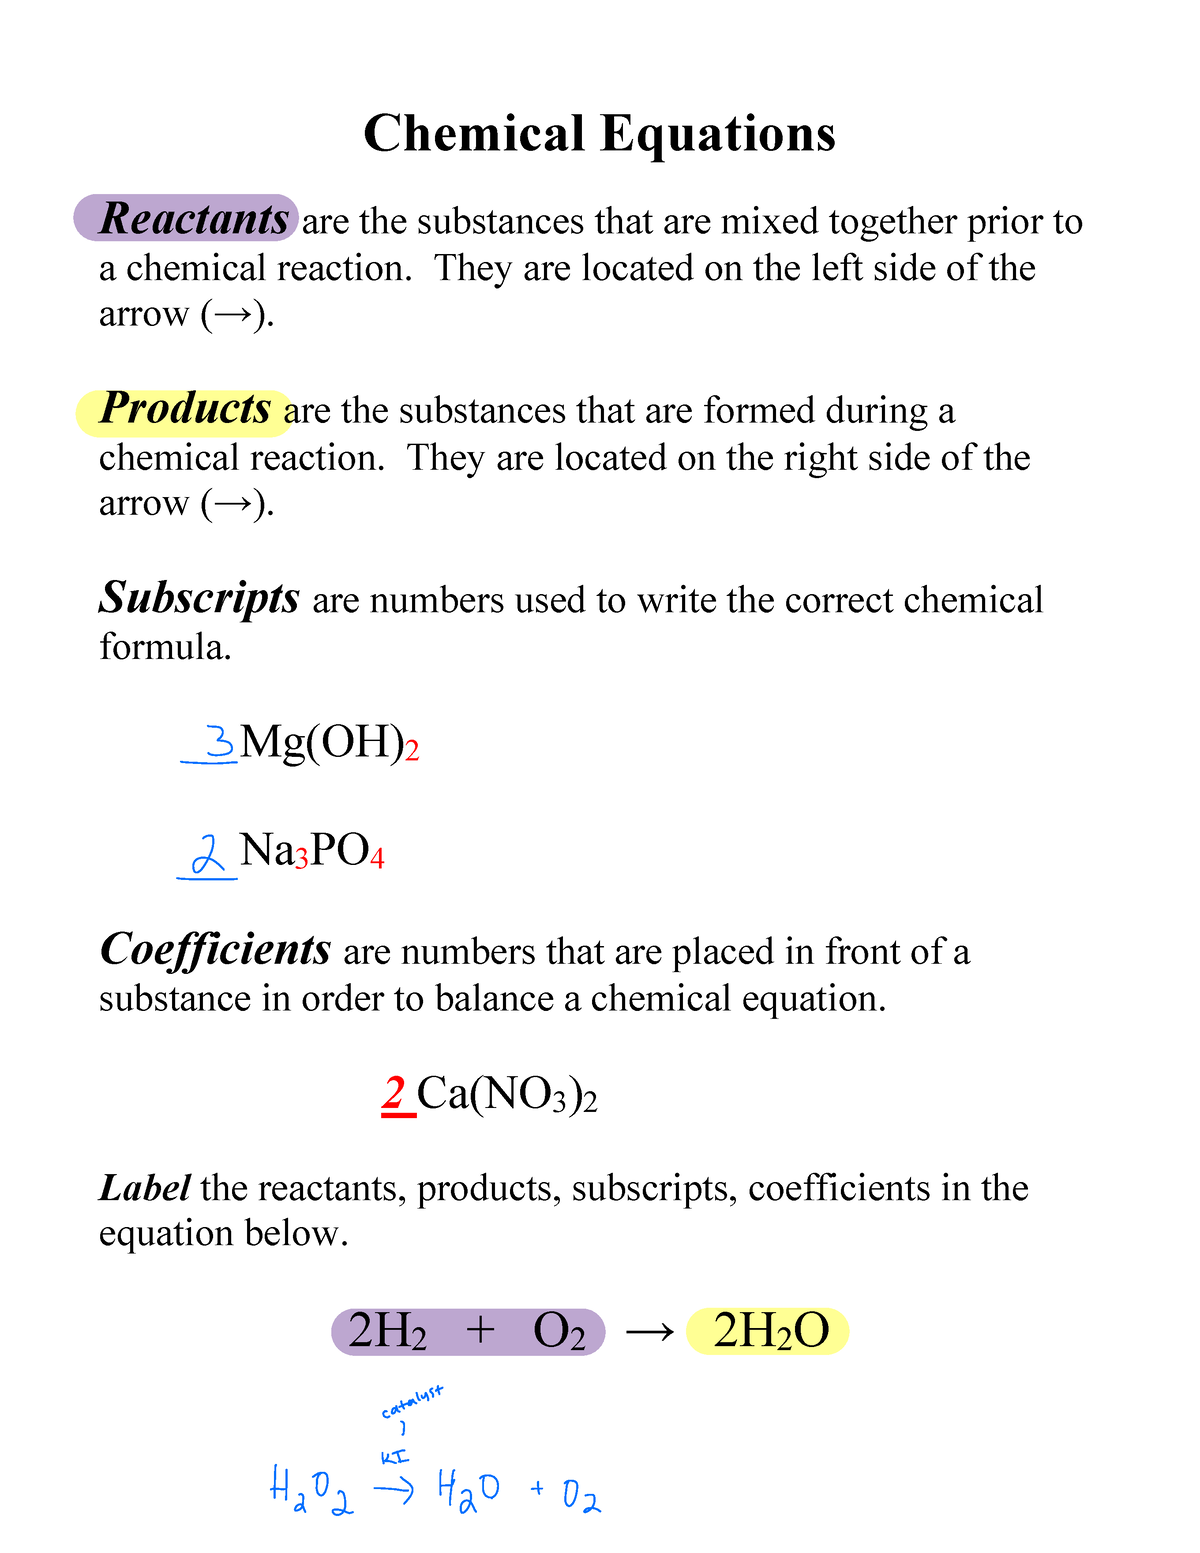 balancing equations and types of reactions assignment